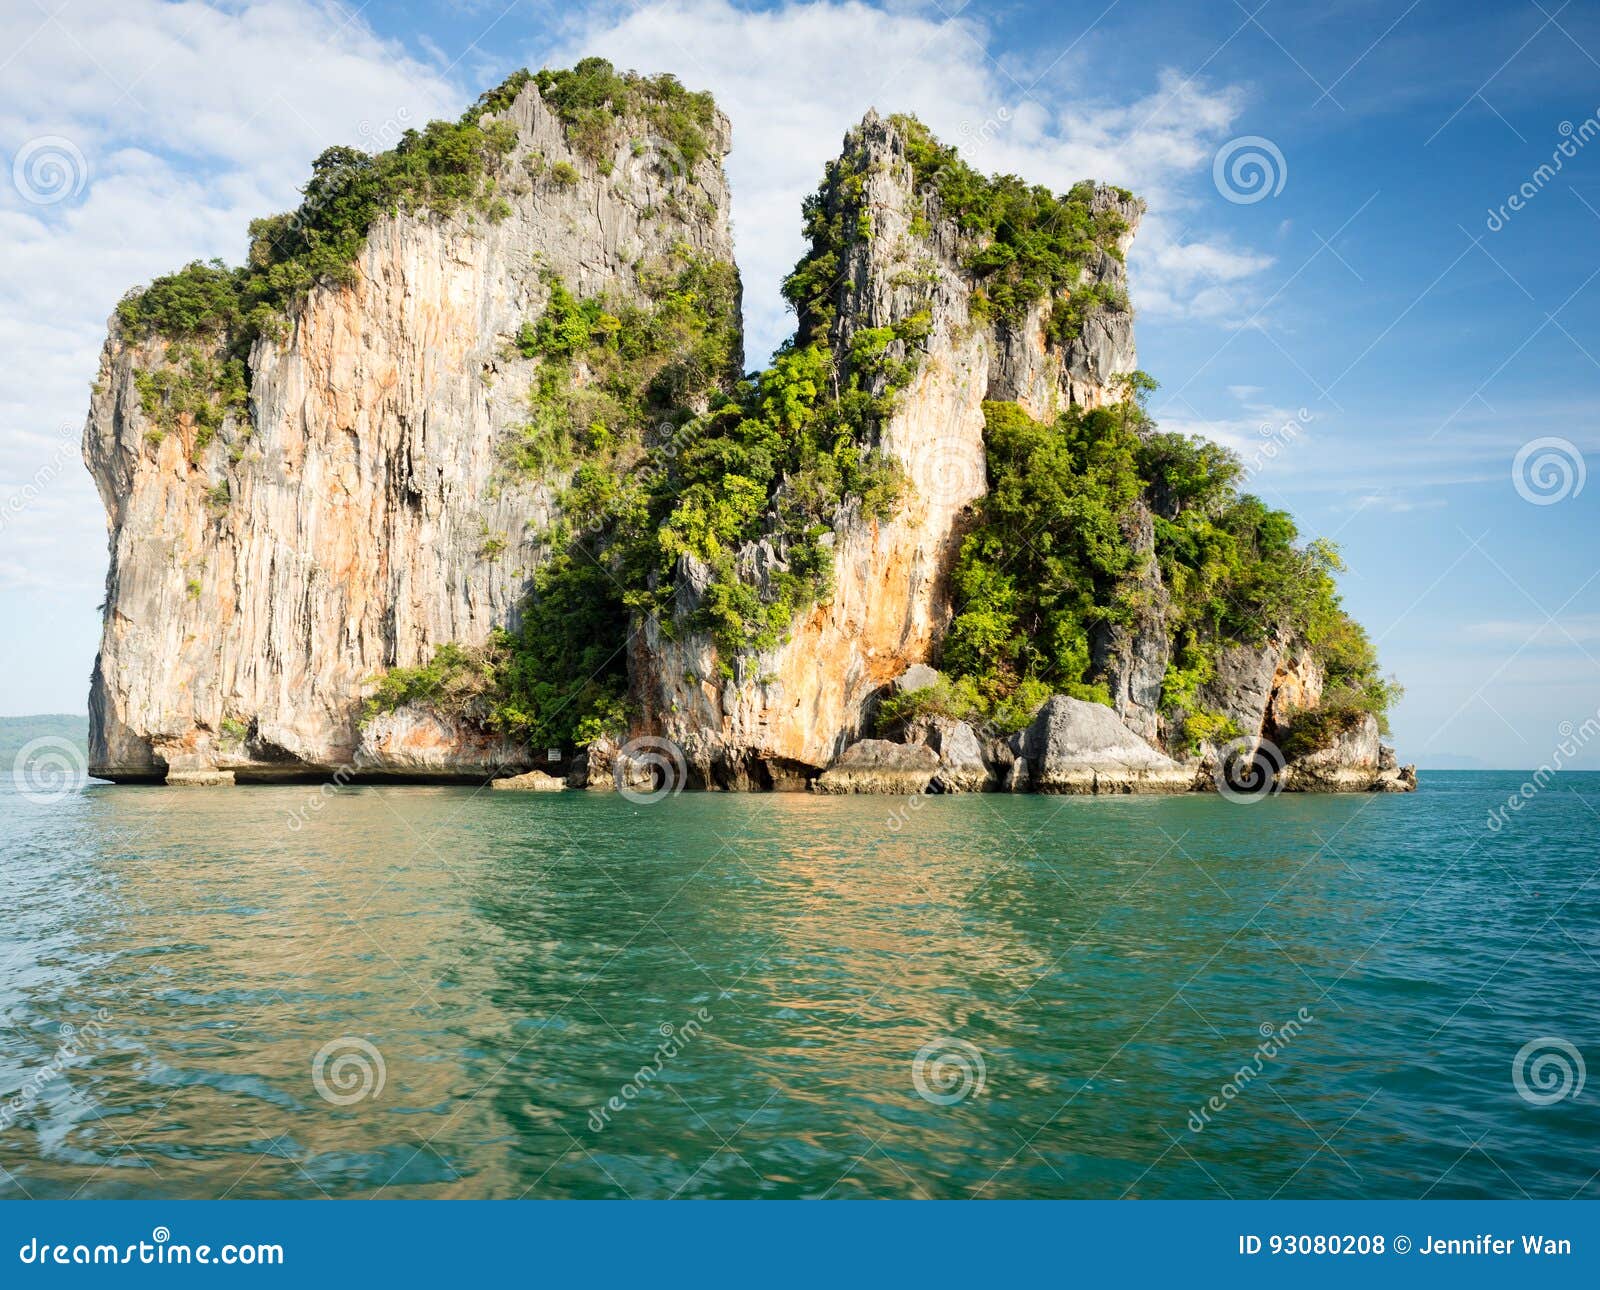 Karst Formation in ANdaman Sea Off the Coast of Koh Yao Noi, Thailand ...